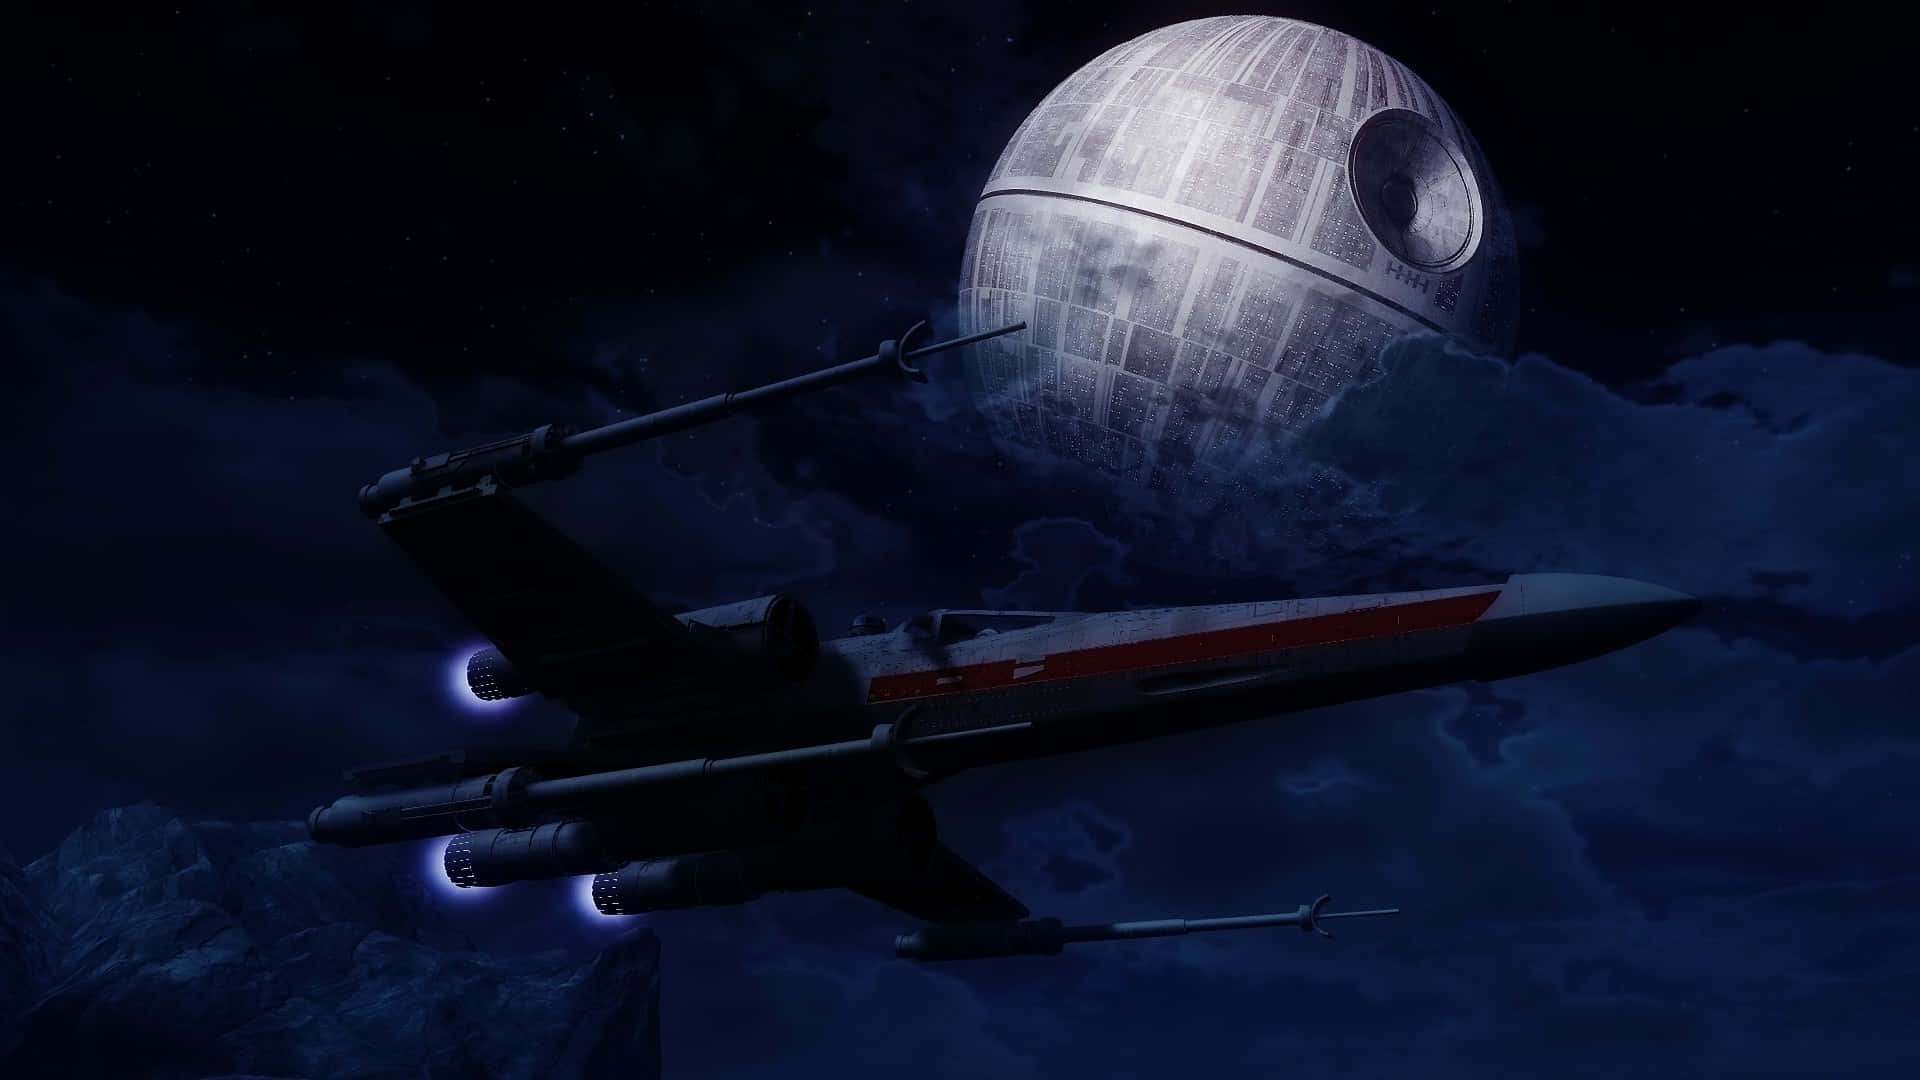 The powerful and awe-inspiring Death Star